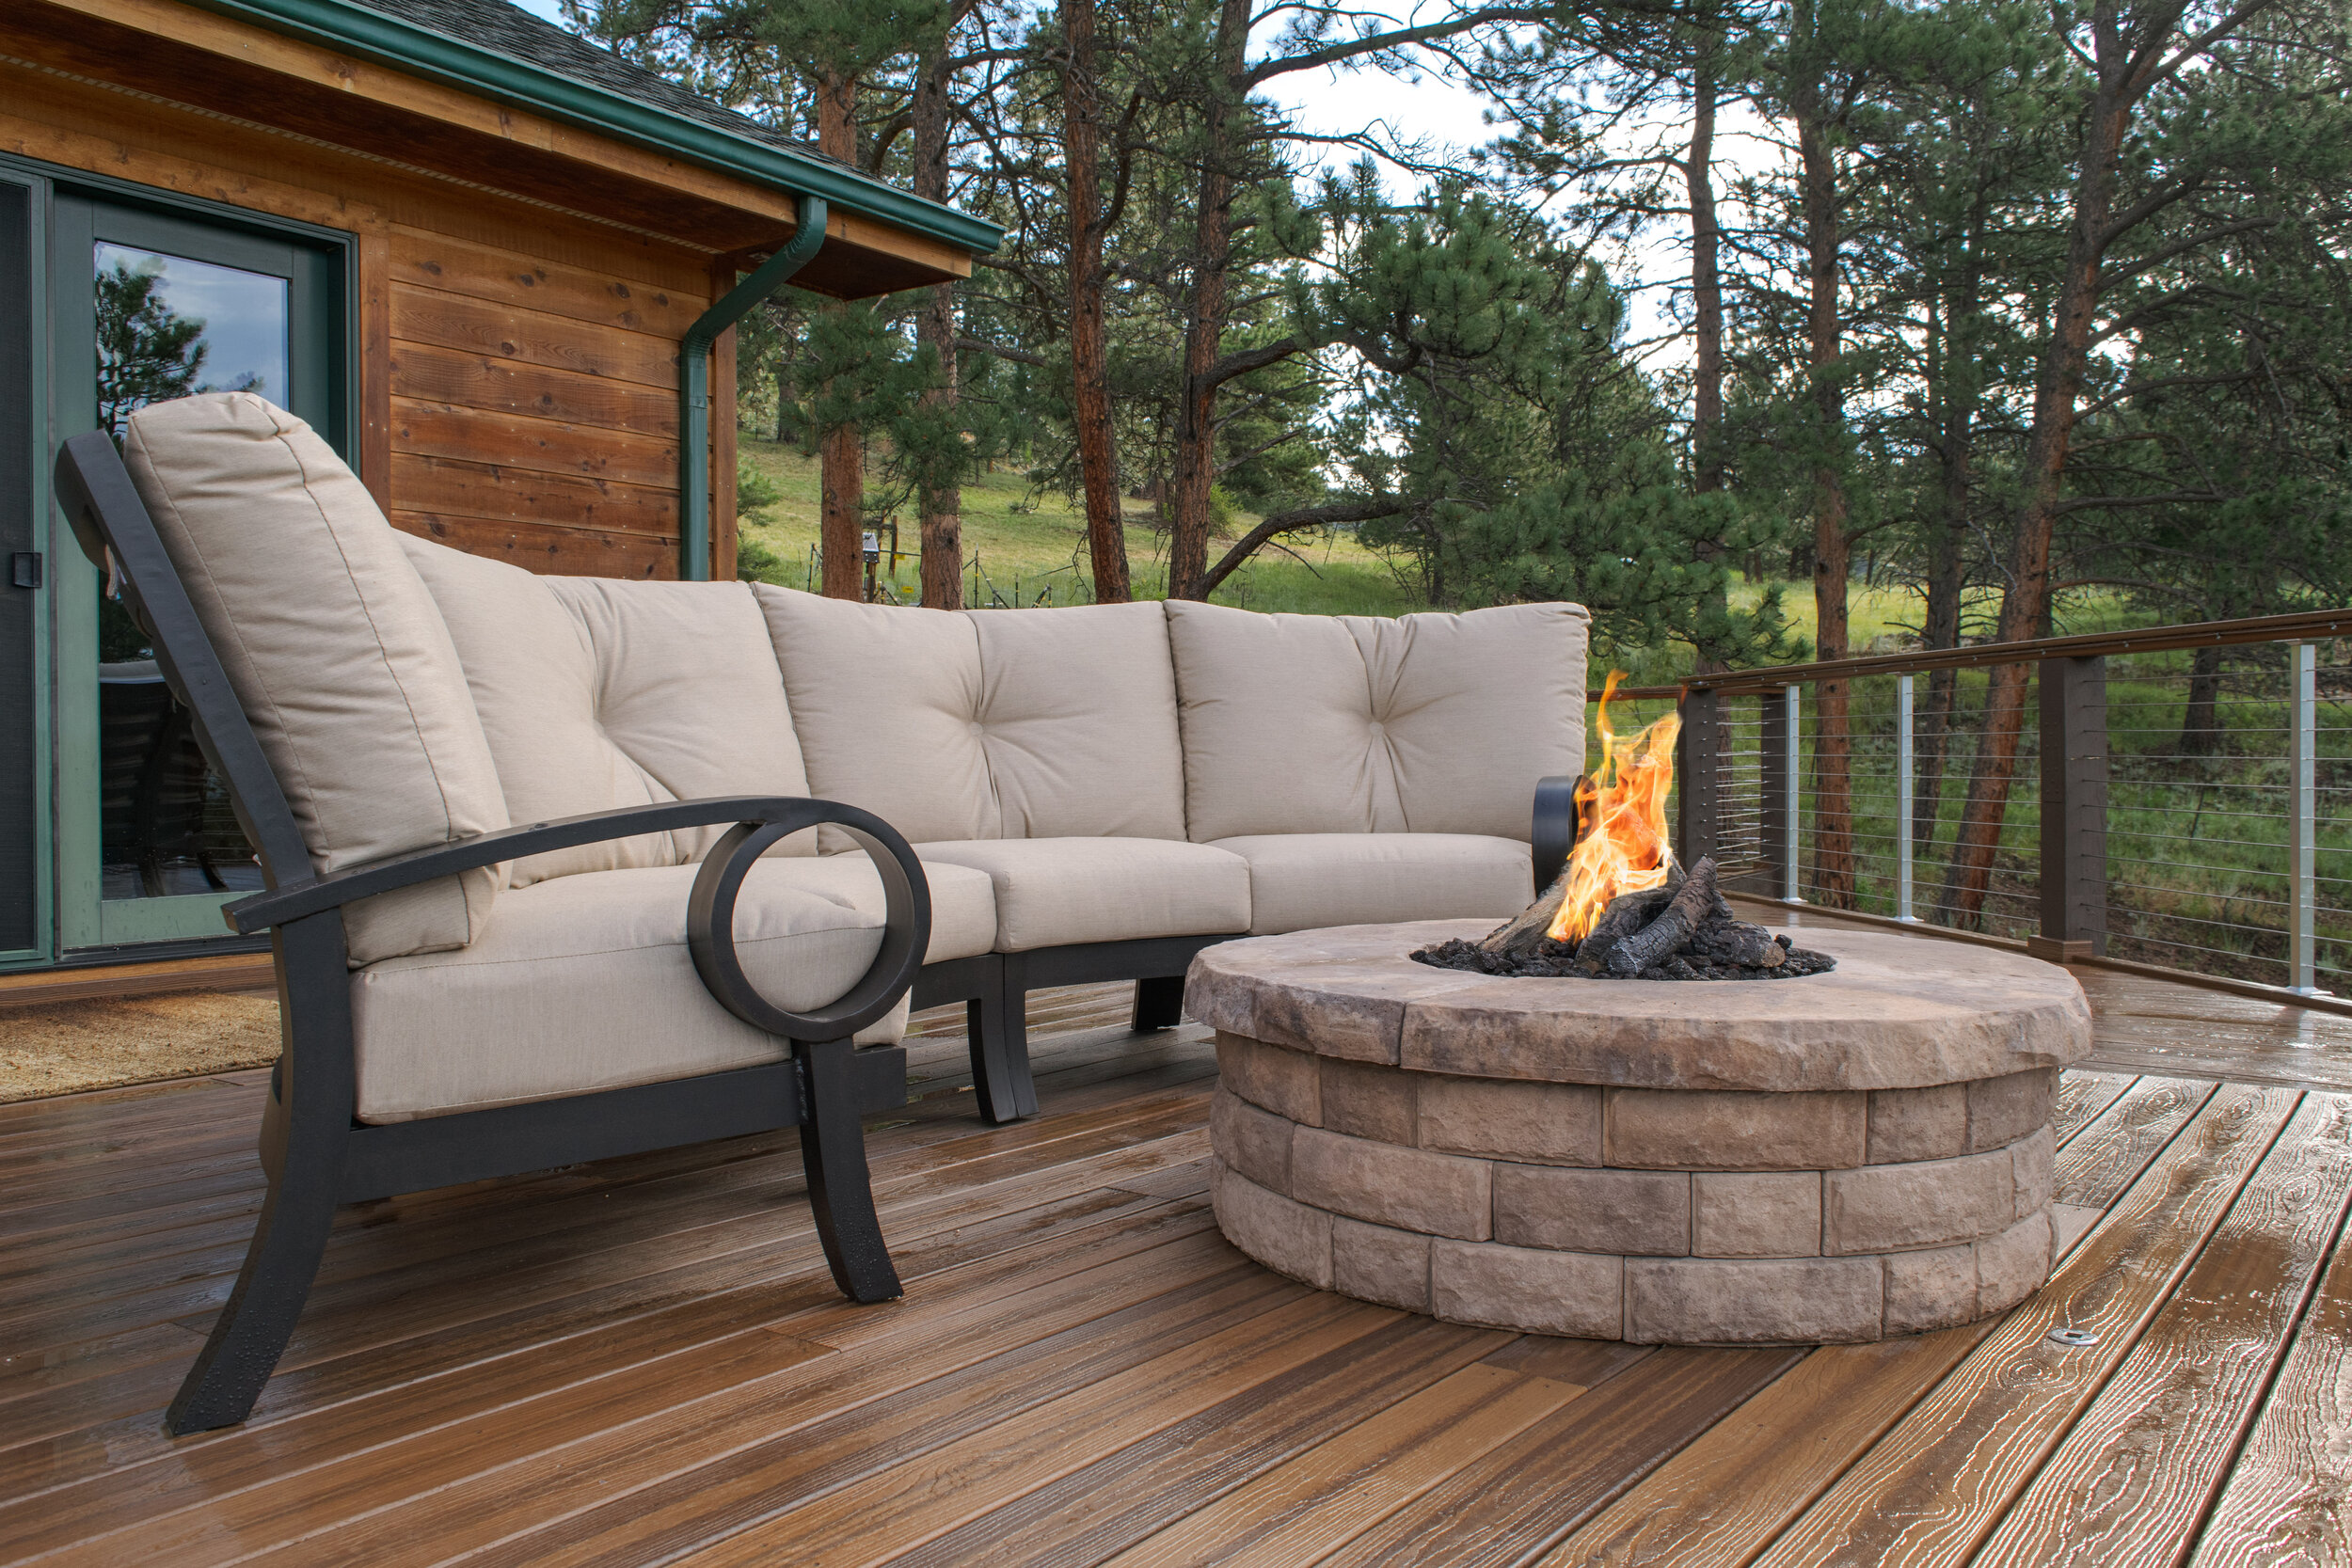 Outdoor Space With A Gas Fire Pit, Warming Trends Fire Pit